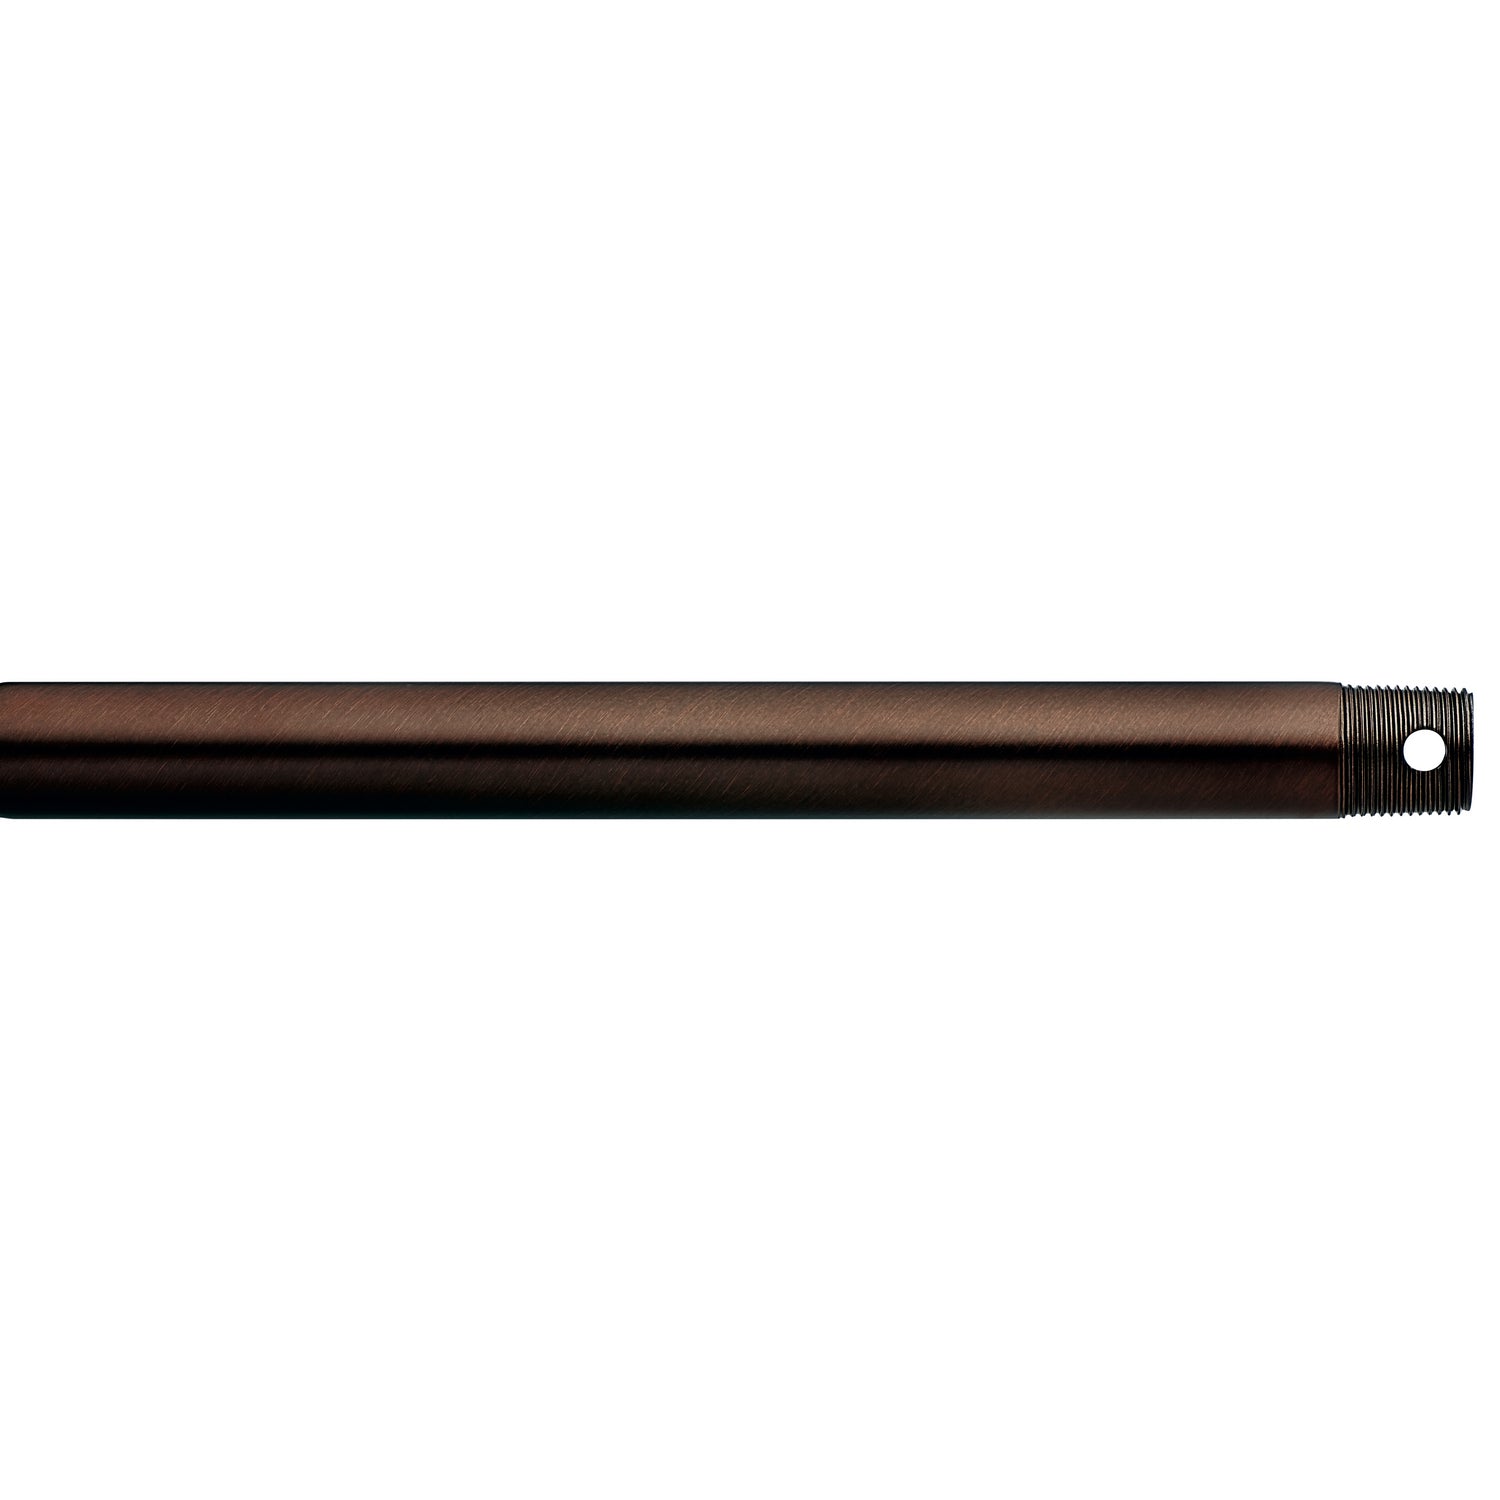 Kichler Canada - Fan Down Rod 36 Inch - Accessory - Oil Brushed Bronze- Union Lighting Luminaires Decor